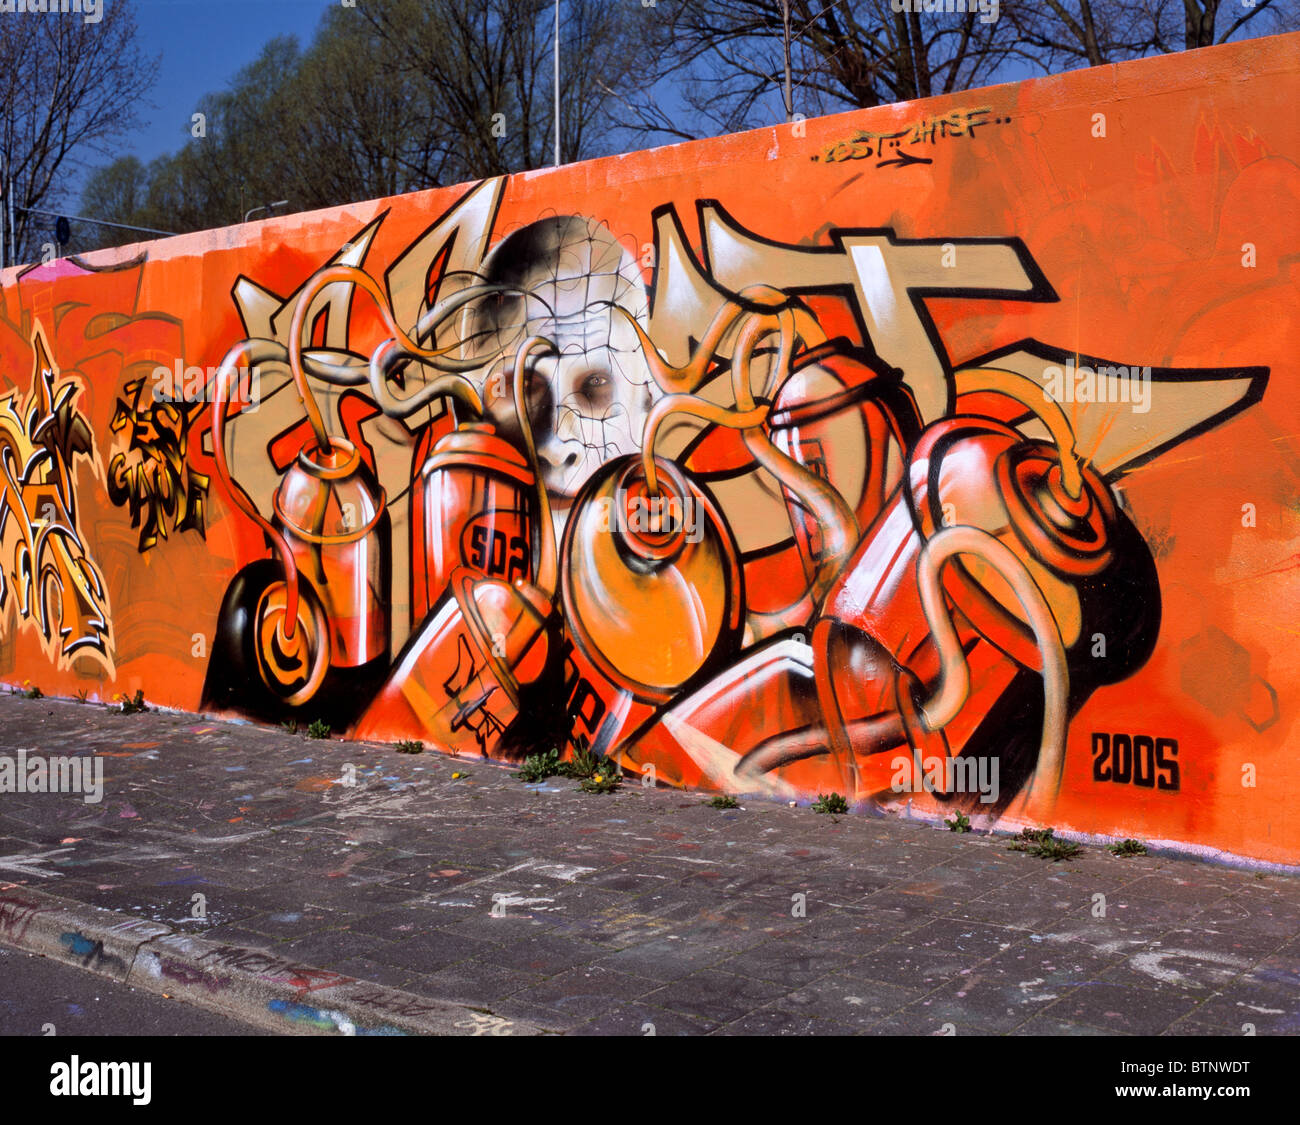 Graffiti showing spray cans in the foreground and a pale white face covered with a net in the background, Delft, NL Stock Photo